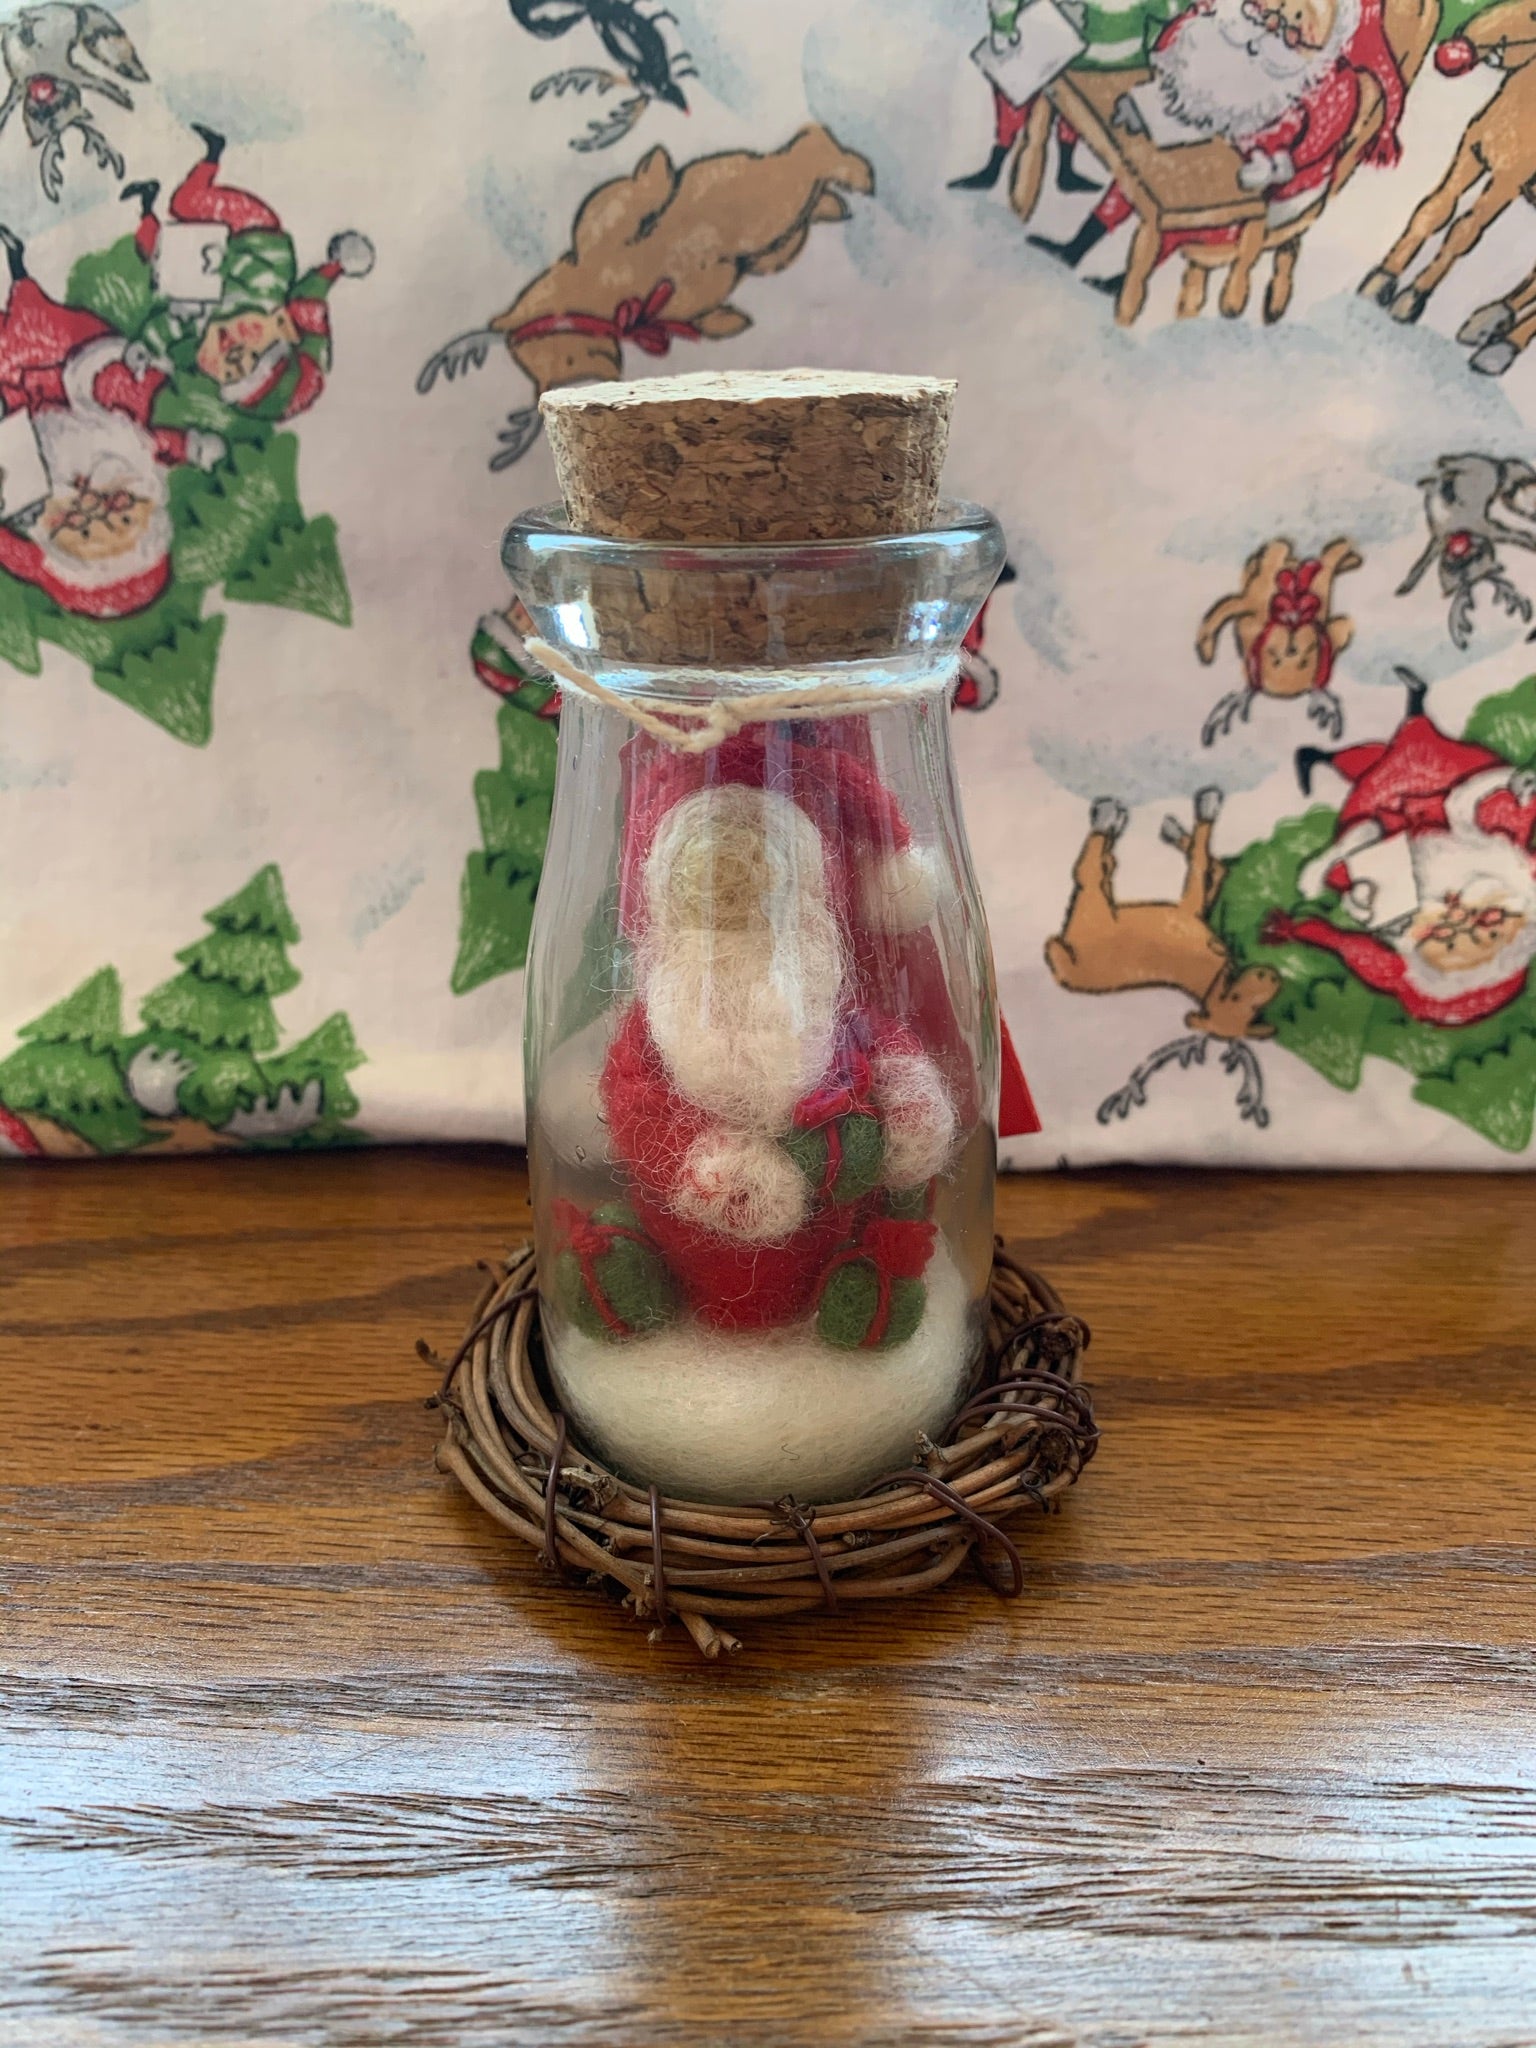 This is a story jar Santa Christmas Ornament. A corked, apothecary jar holds Santa sitting on the snow holding a gift and with two other gifts on the snow around him.  He wears the traditional Santa colors of red & white and wears white woolen mittens.  He is made of 100% natural, hand-felted wool and is approximately 4.5"x2". He comes with a fair trade home & garden tag.